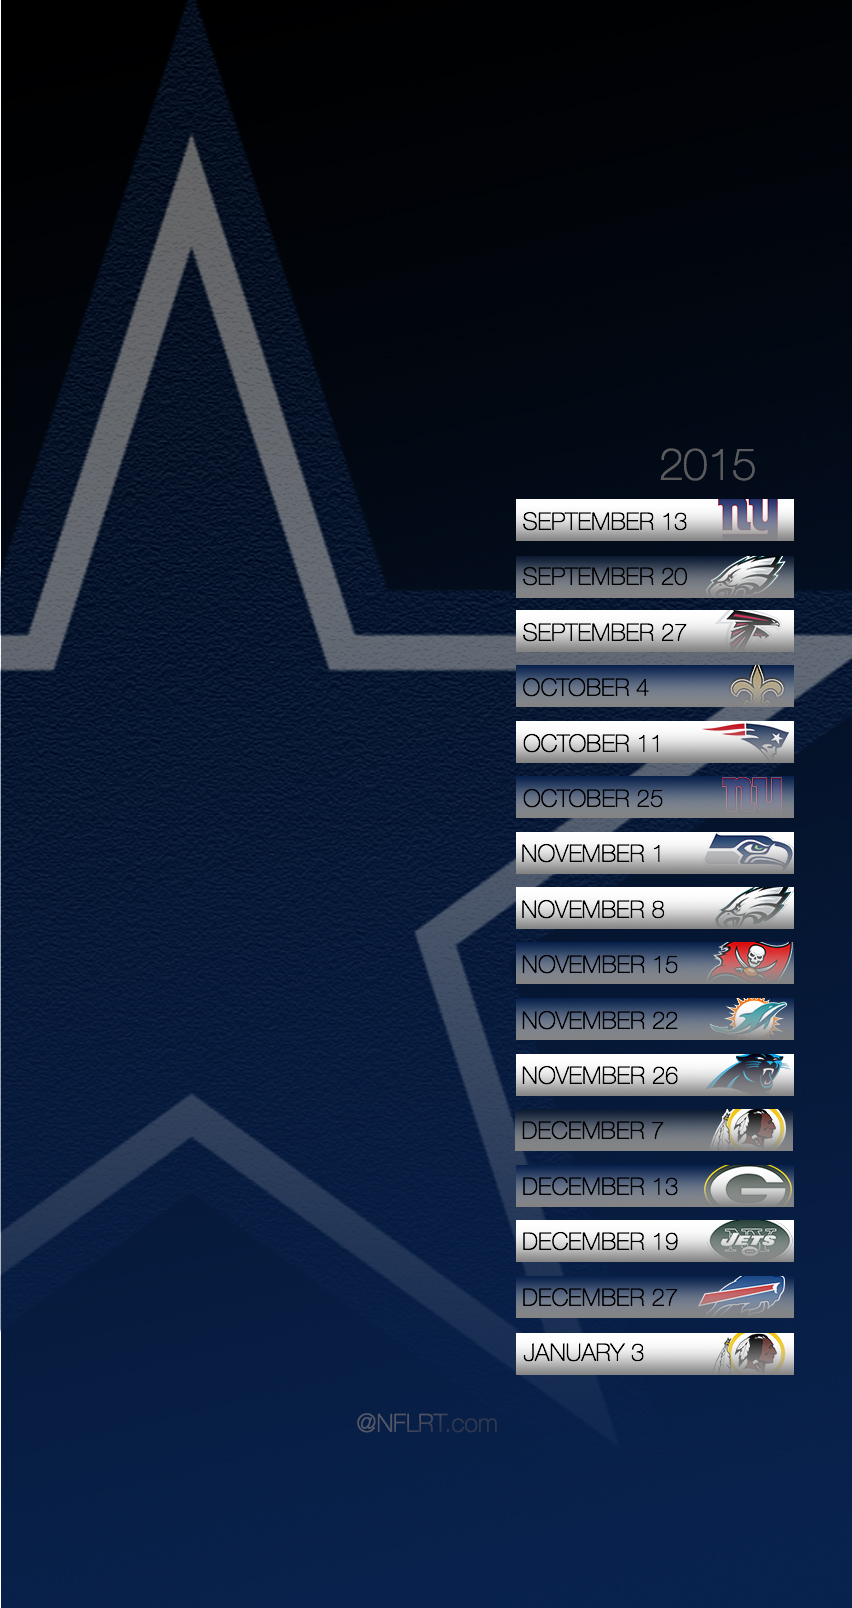 Free download 2015 NFL Schedule Wallpapers Page 2 of 8 NFLRT [852x1608